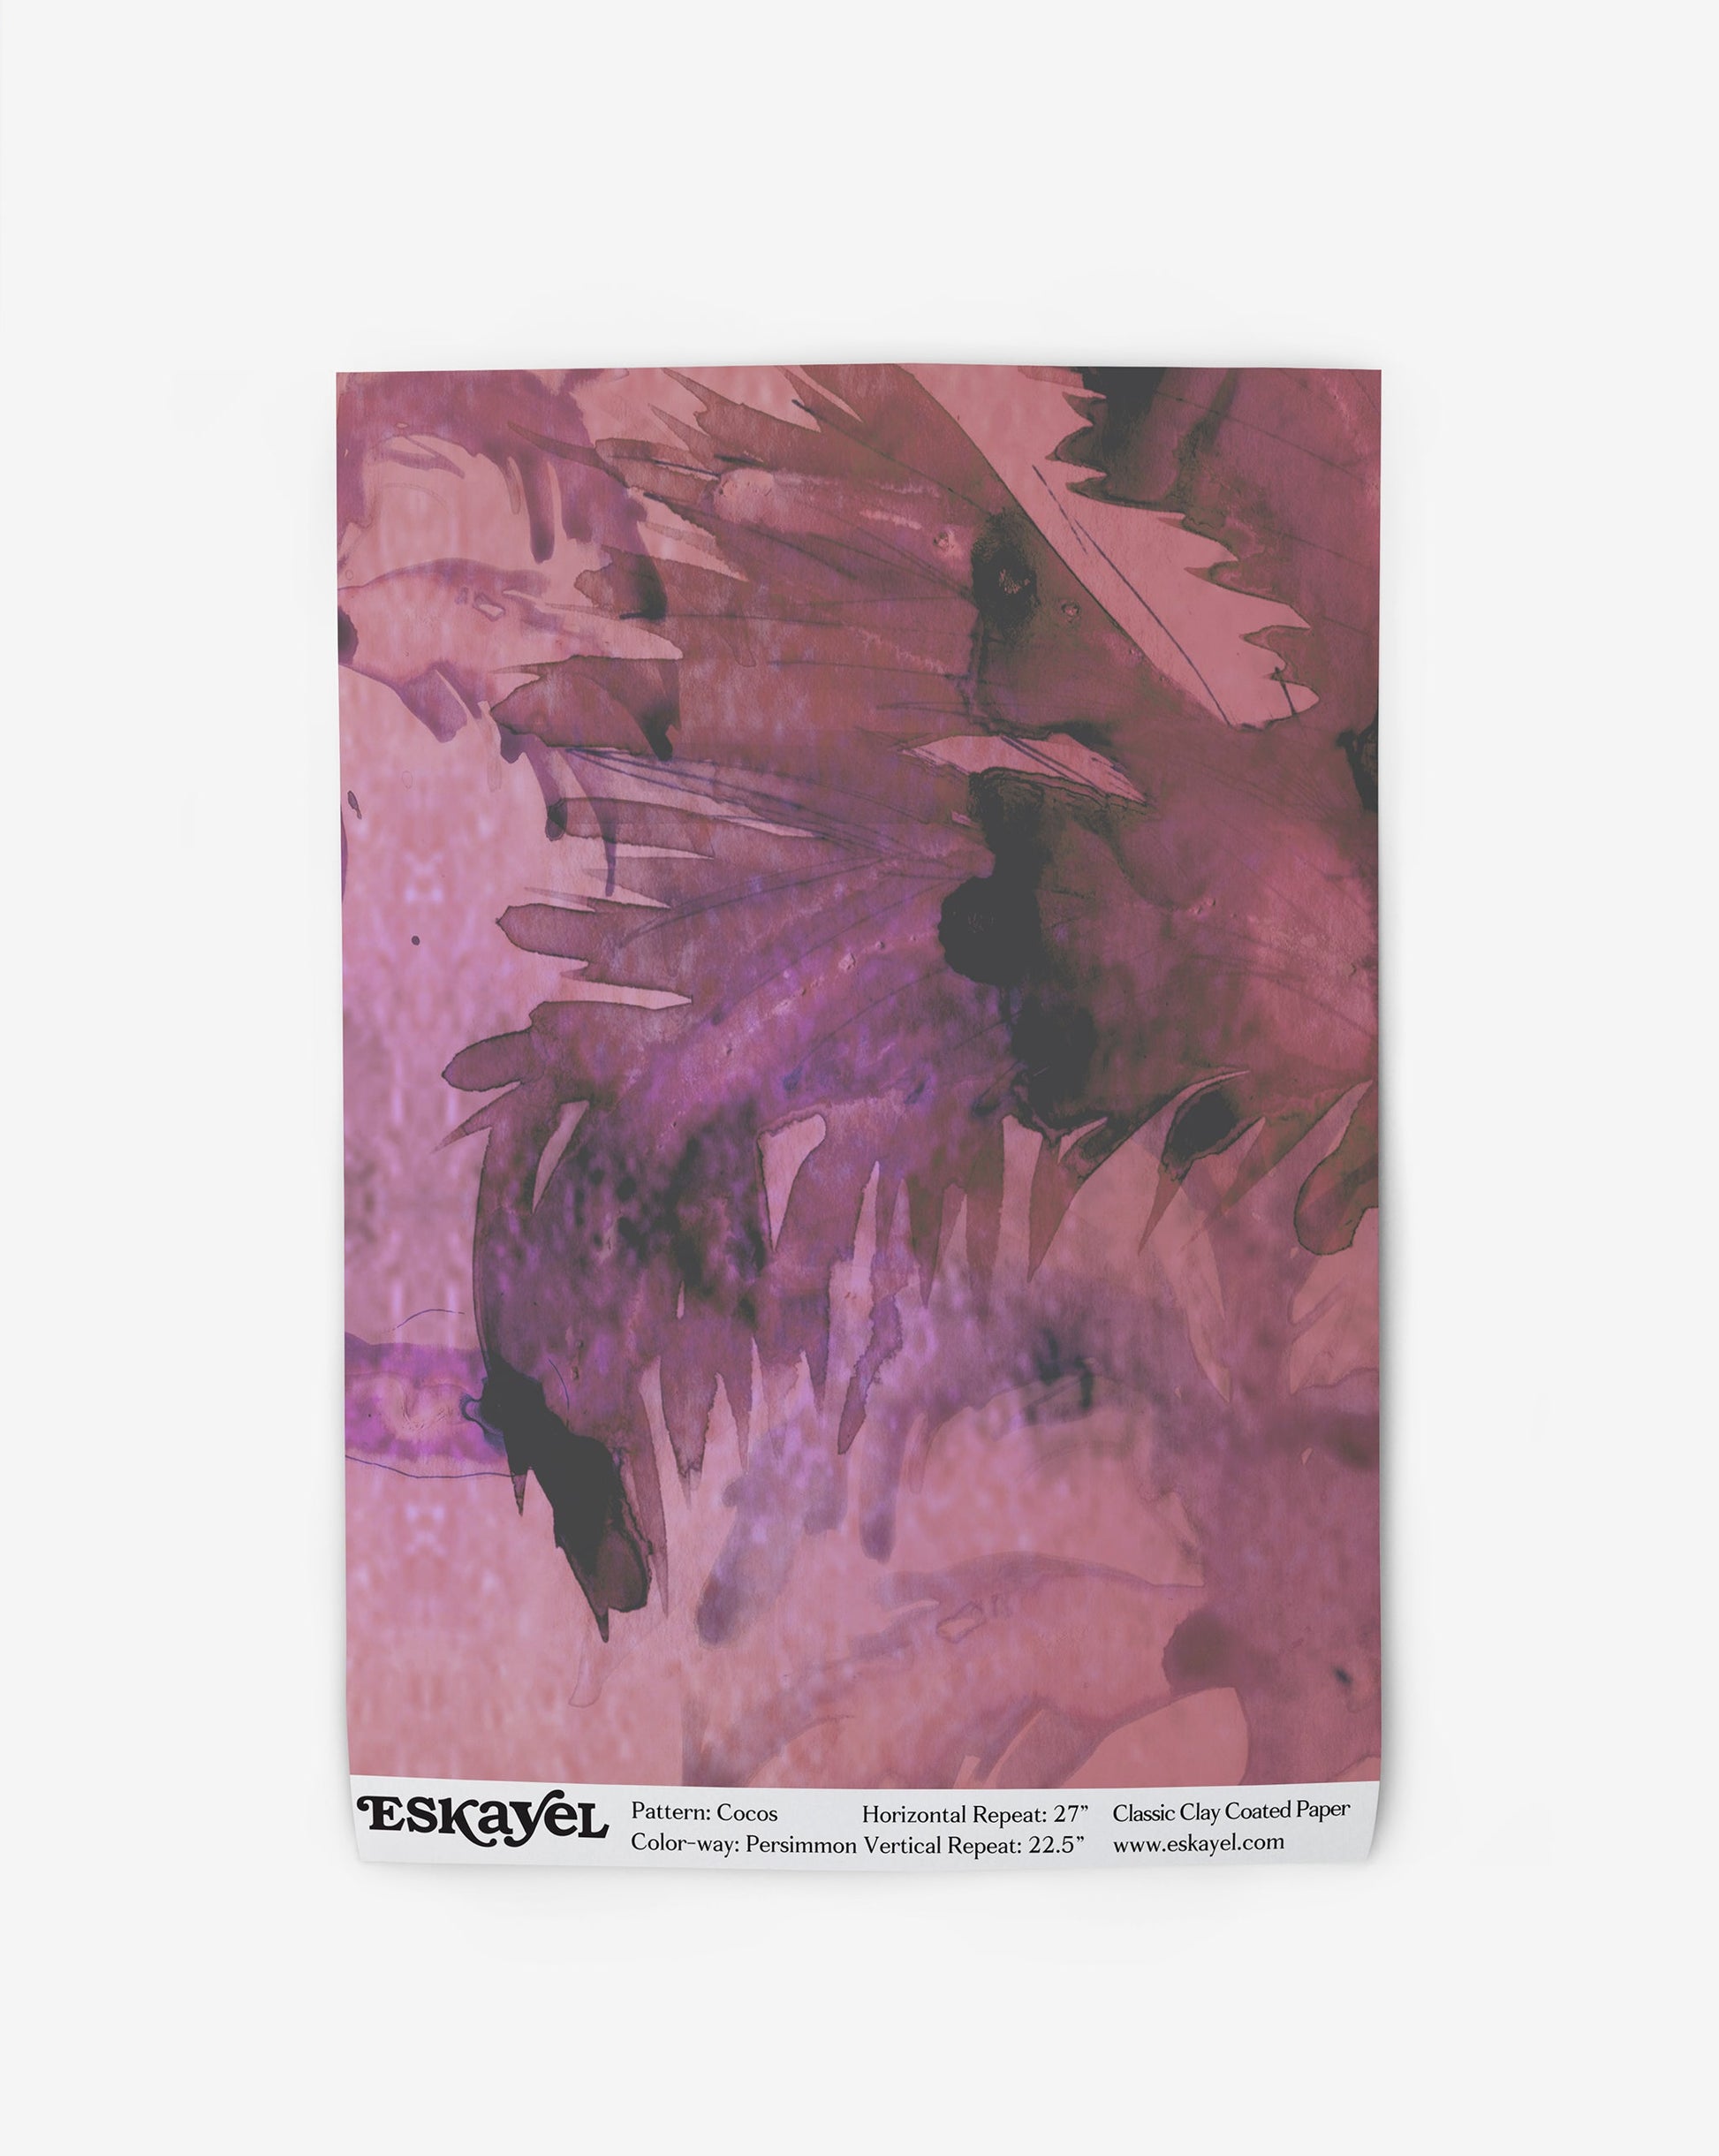 Abstract watercolor wallpaper sample in shades of pink and purple with the label "eskayel, pattern: cocos" at the bottom.